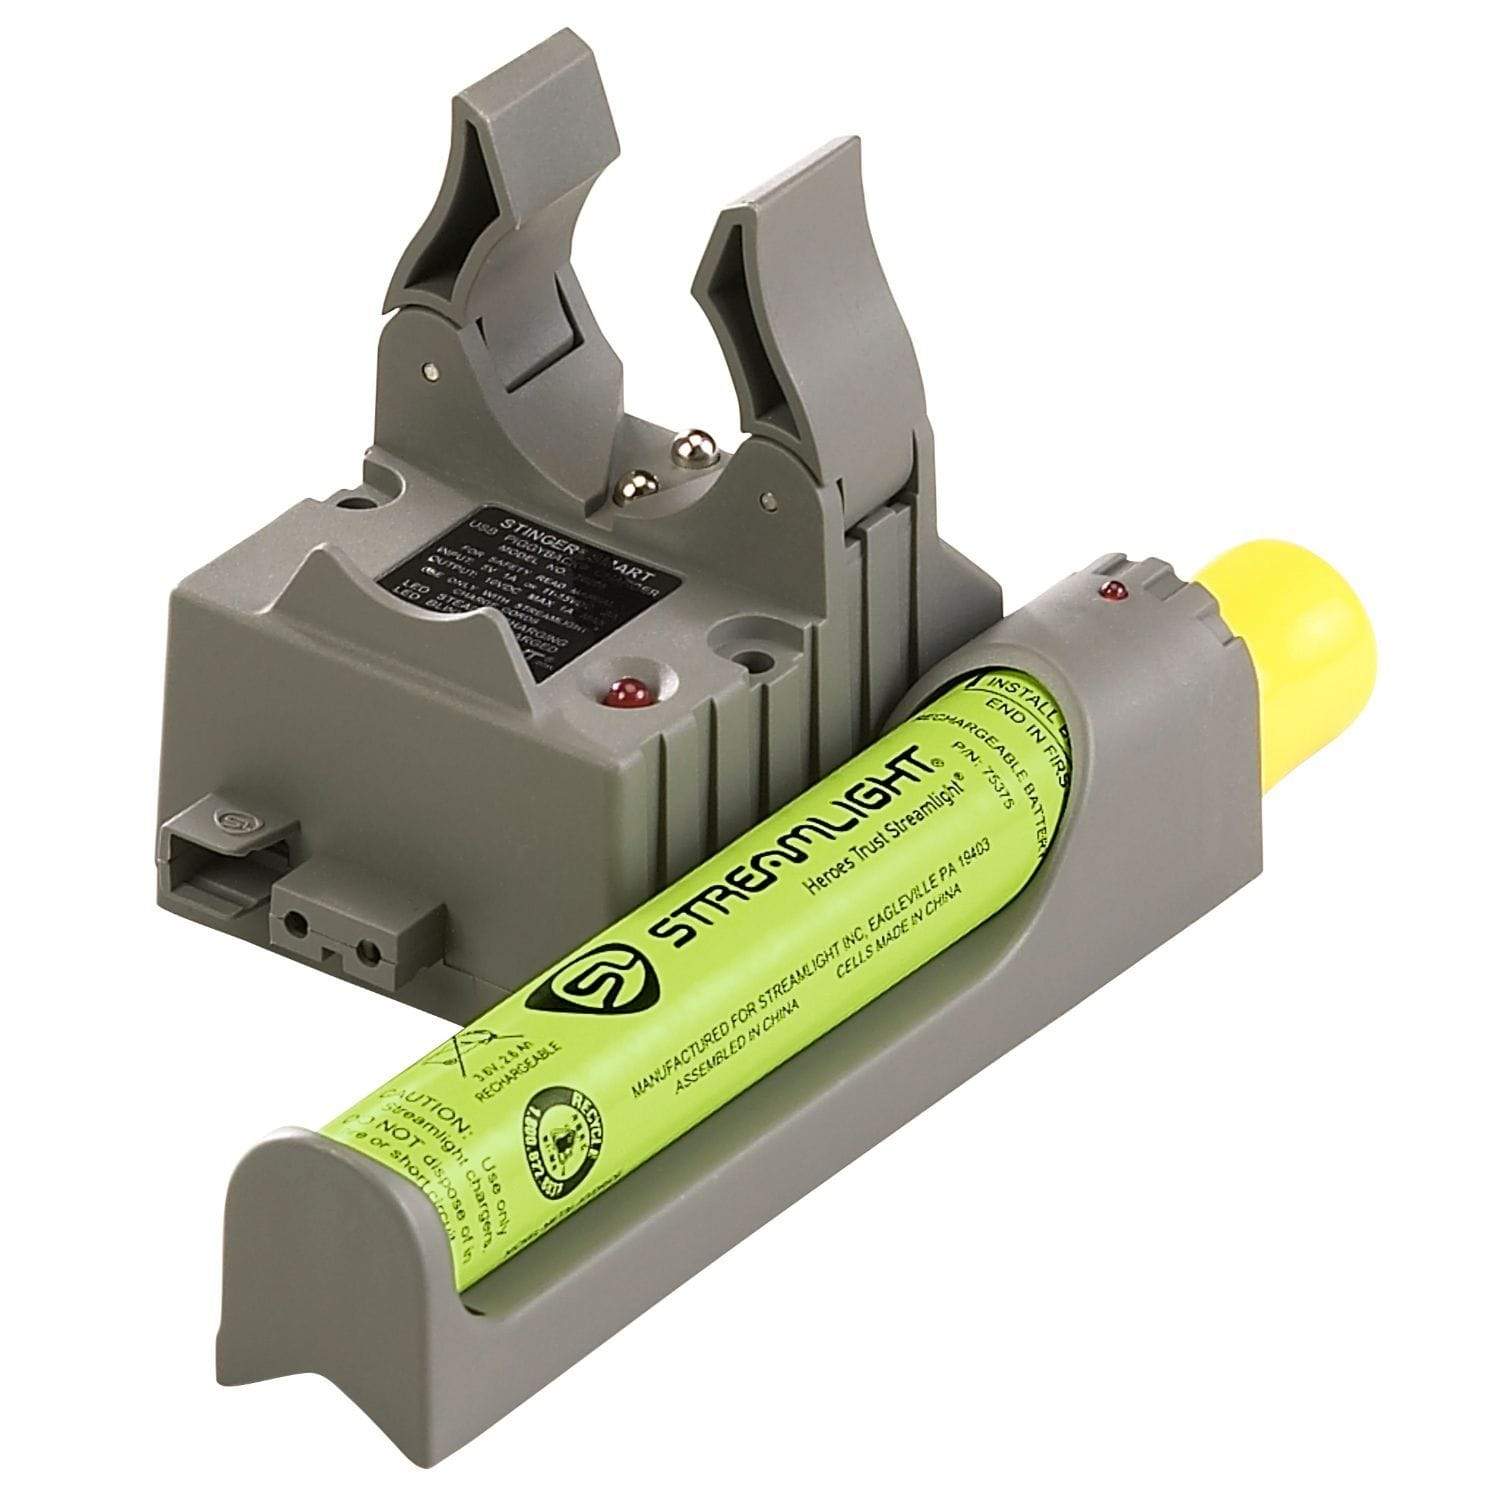 Streamlight Lights : Accessories Streamlight Stinger Smart PiggyBack Charger with Battery